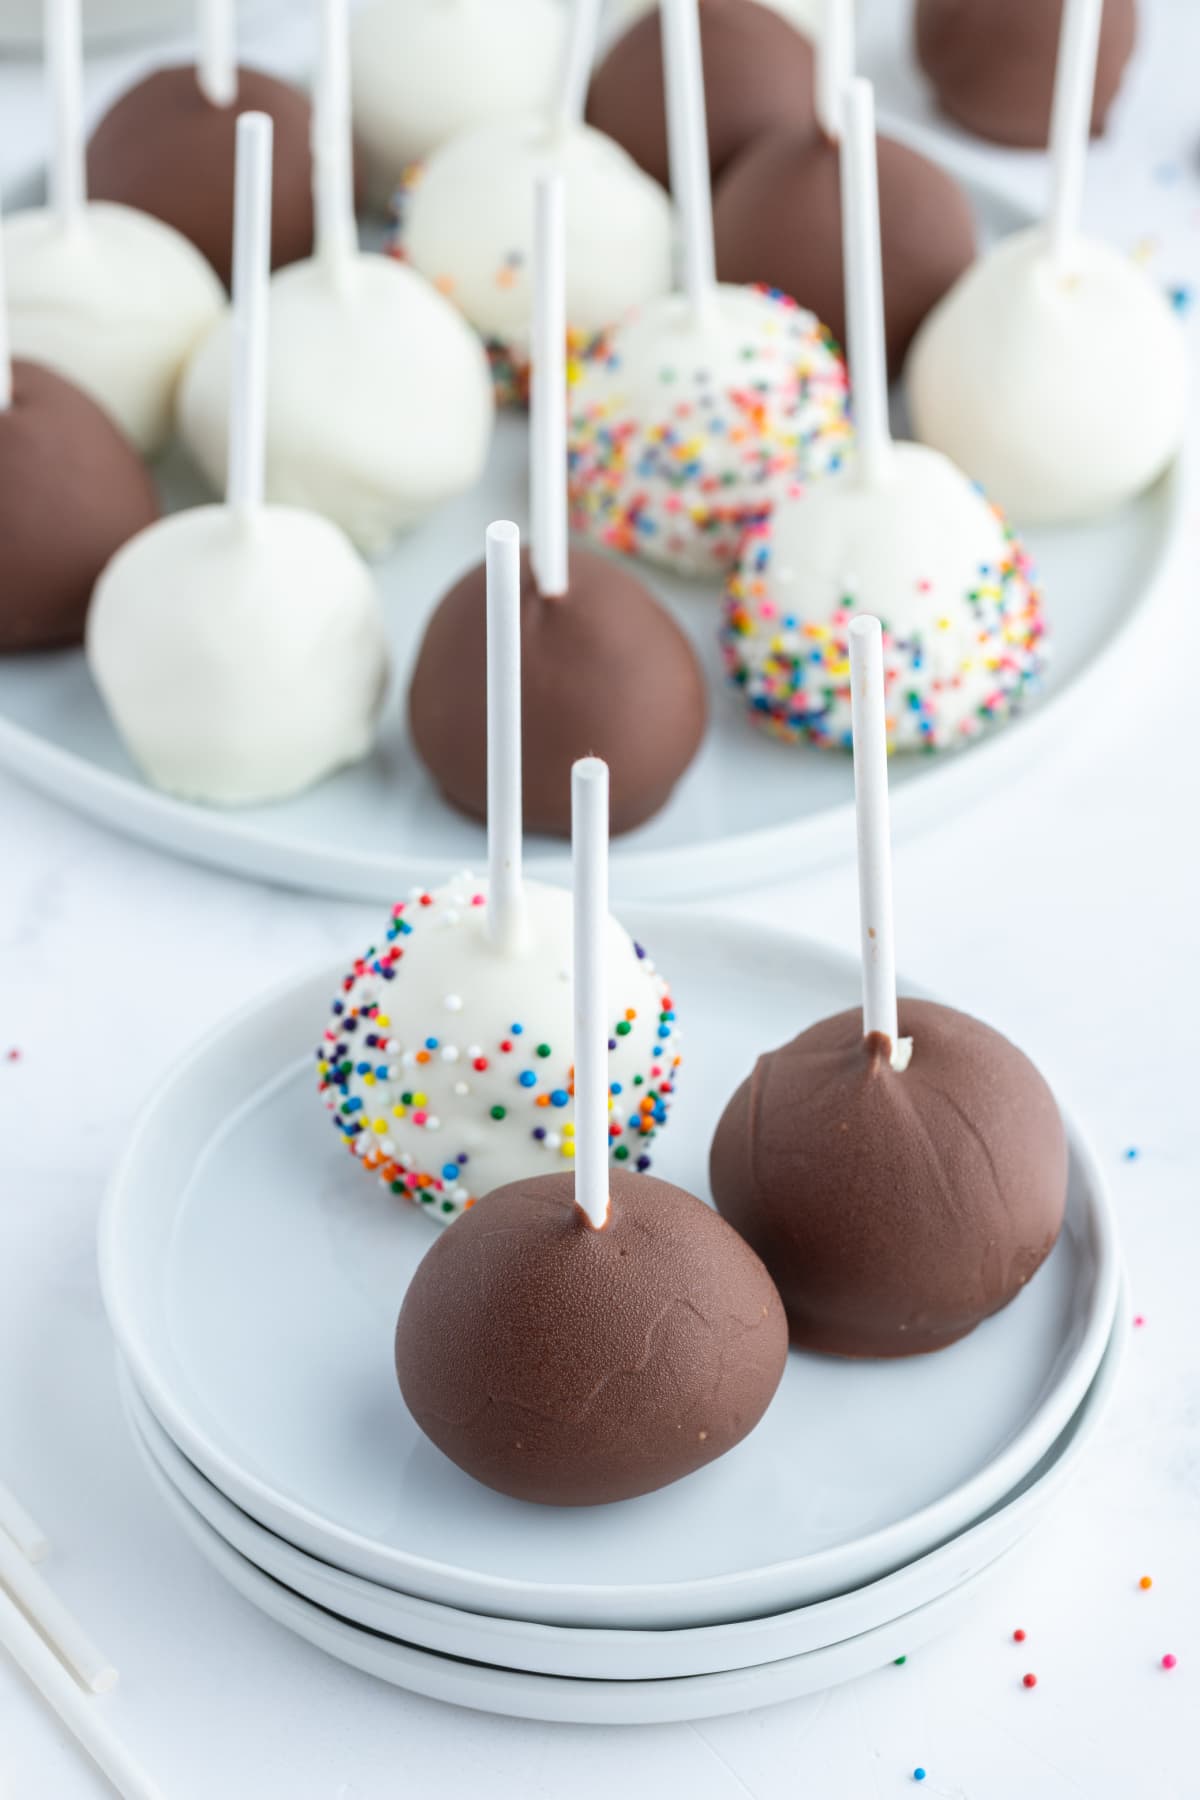 cheesecake pops displayed on plates